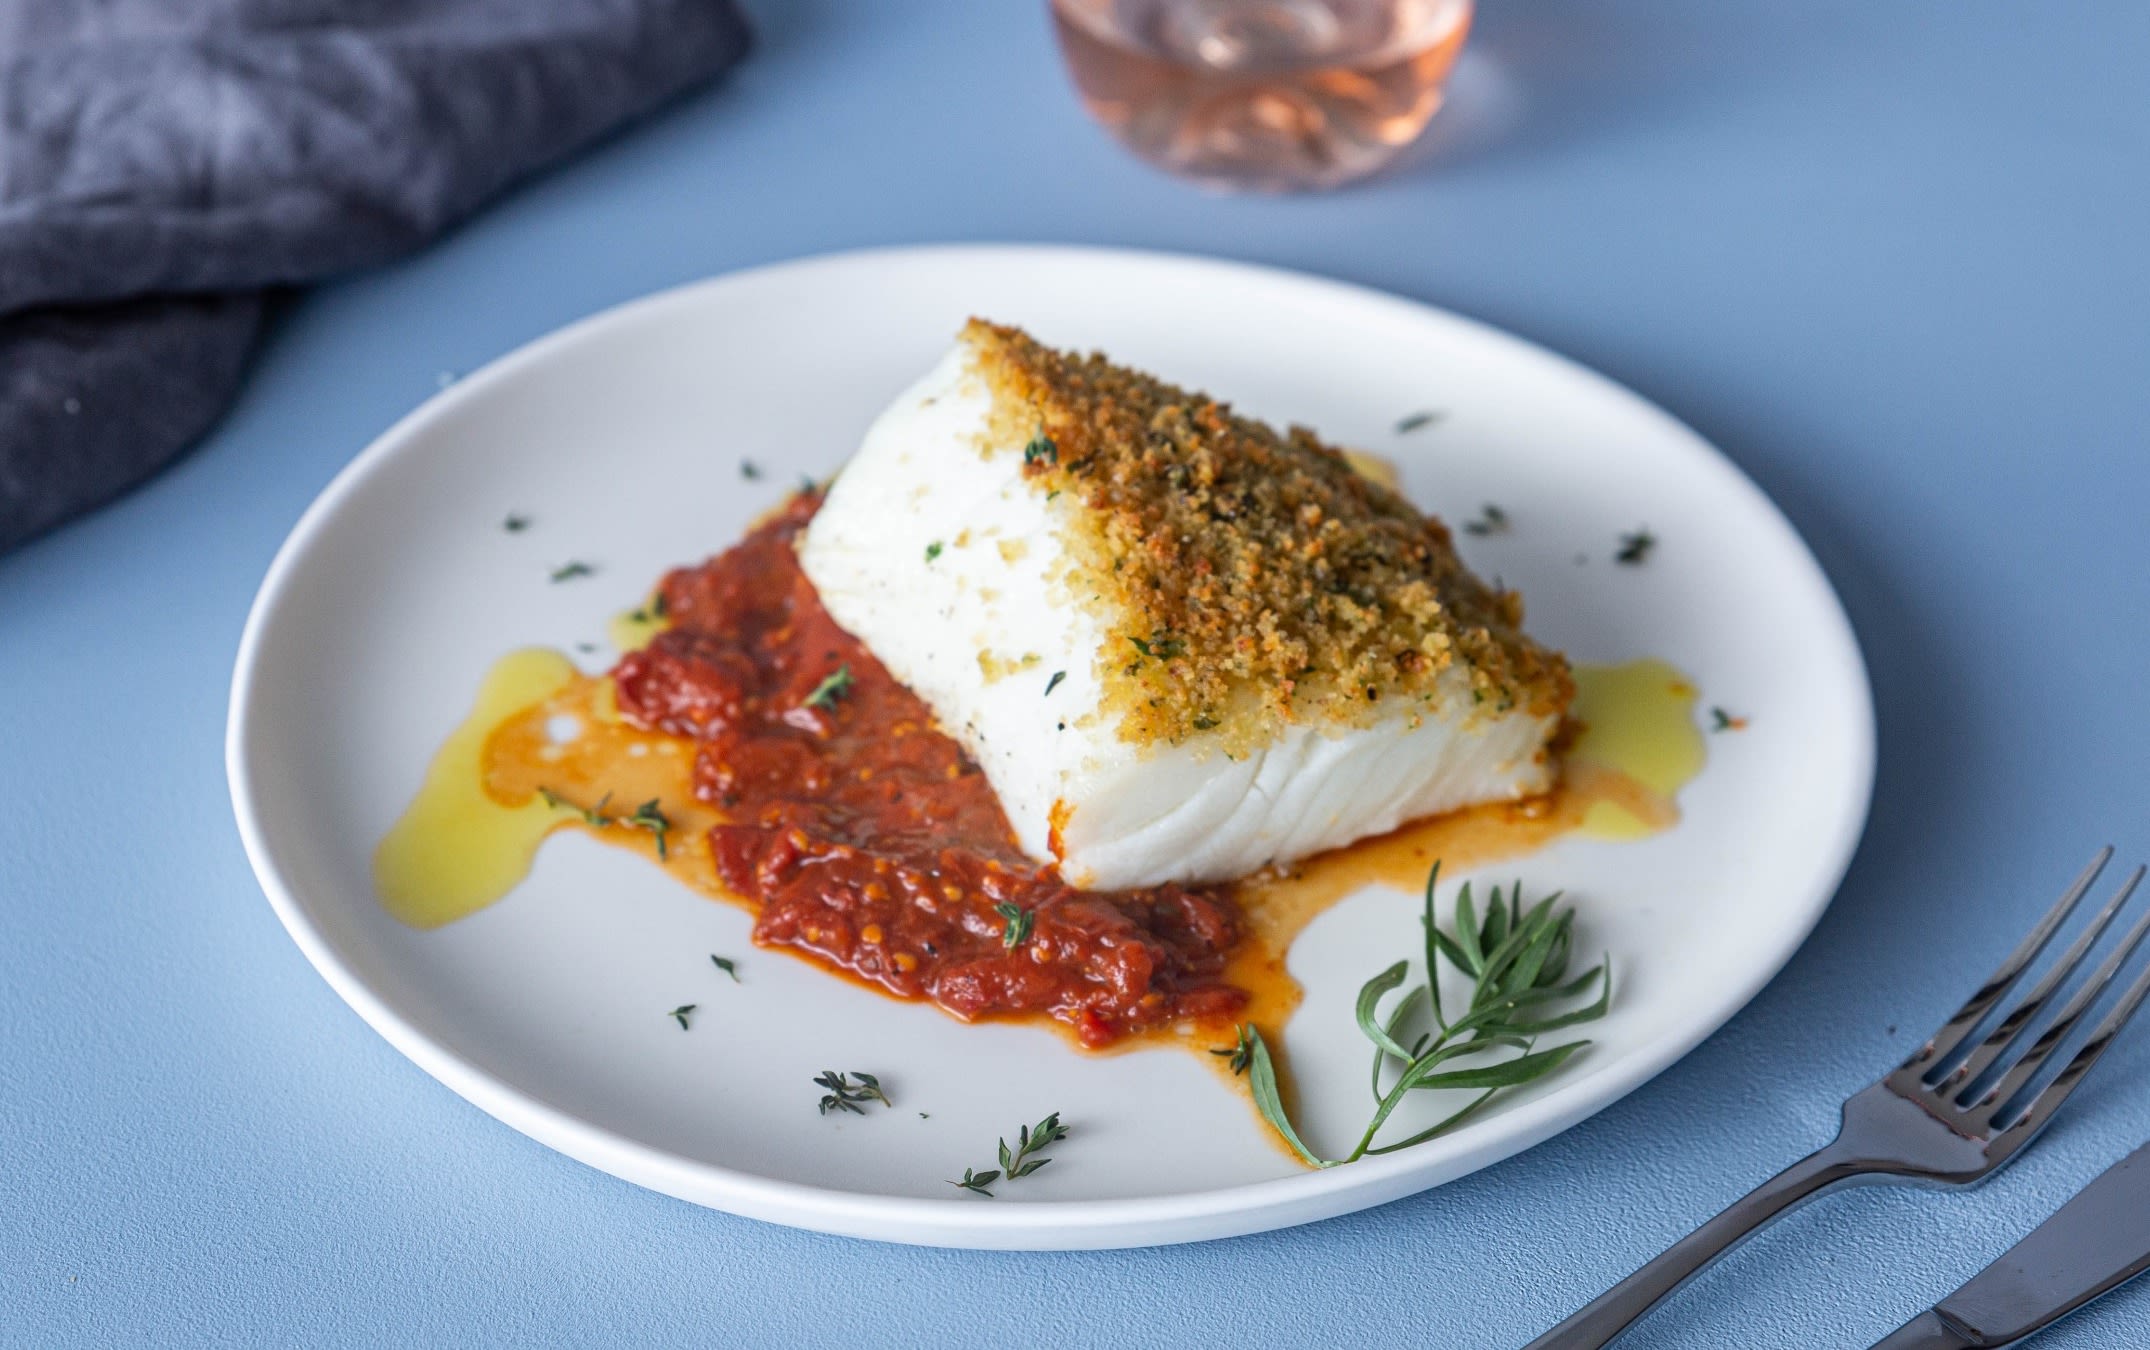 Herb crusted toothfish with roast tomato sauce